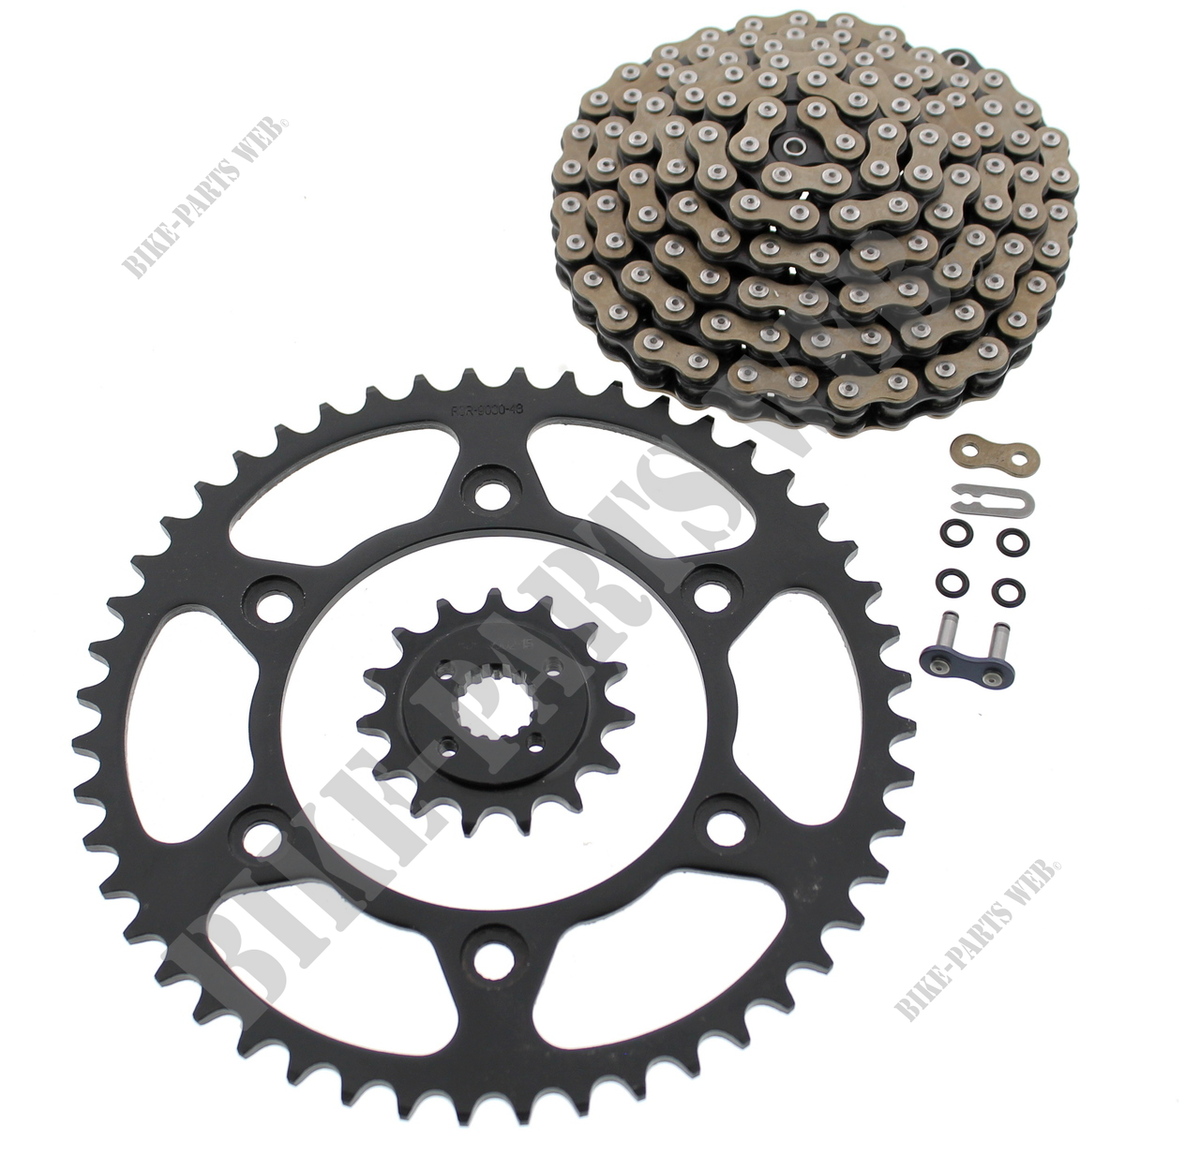 Transmission, chain kit reinforced X-ring XR600R starting from 1991 - 